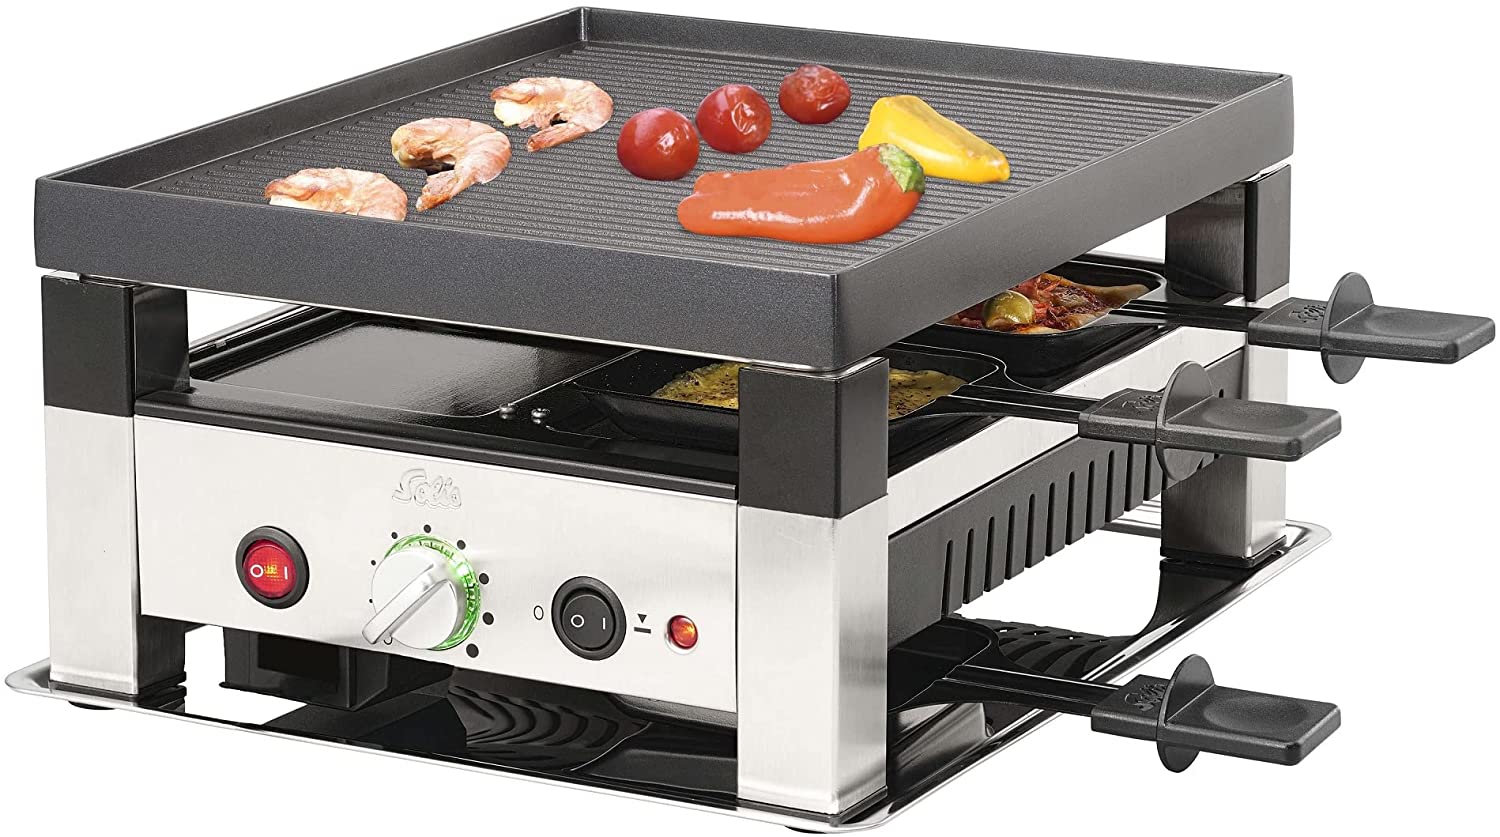 Solis Table Grill 5 in 1 Table Grill for 4 7910 - Raclette + Grill + Wok + Pizza Grill + Crepes - Raclette for 4 People - Stainless Steel